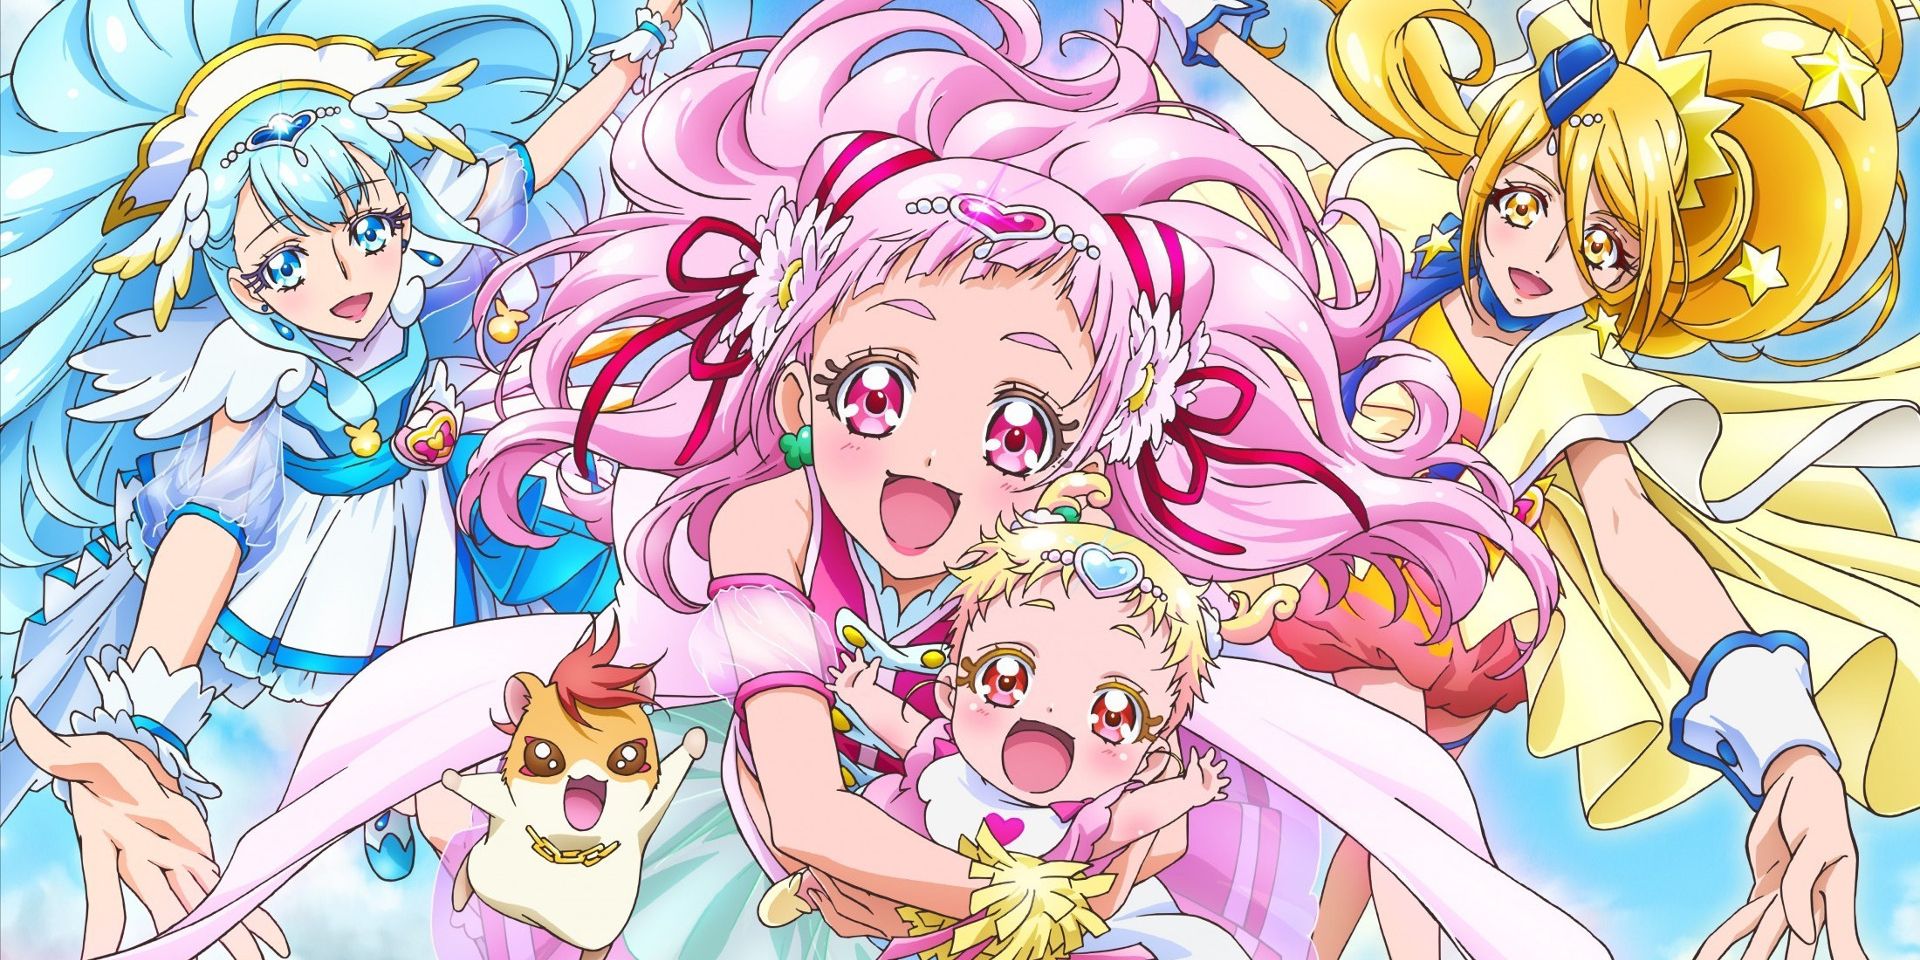 Hugtto Precure Precure Magical Girl Anime Glitter Force Characters Sexiz Pix